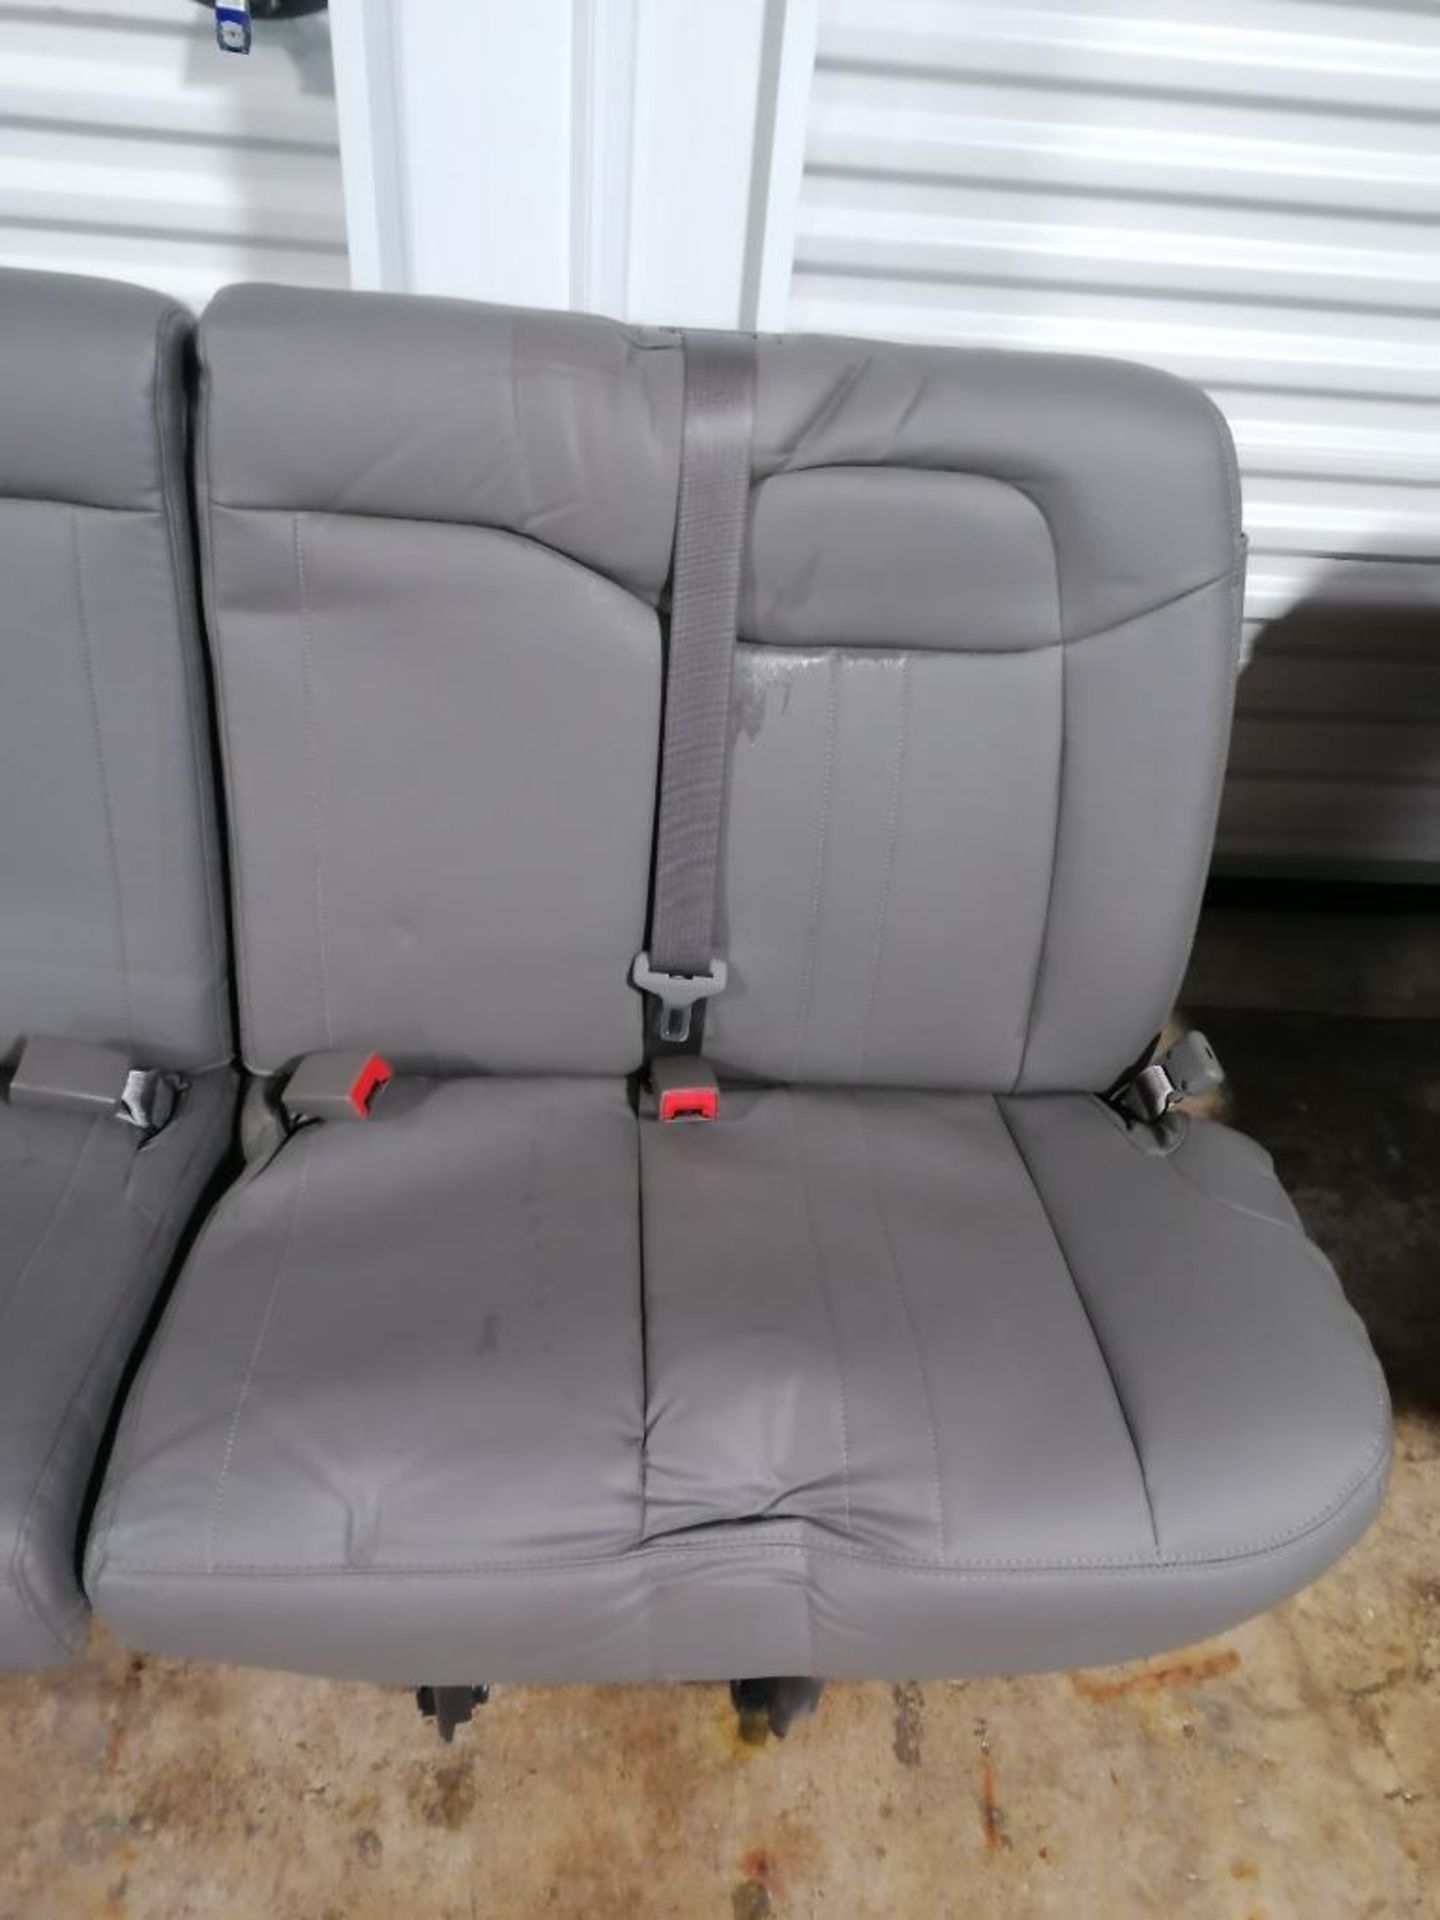 NEW 2021 Chevrolet Express Passenger Seat Row. Located in Mt. Pleasant, IA. - Image 2 of 4